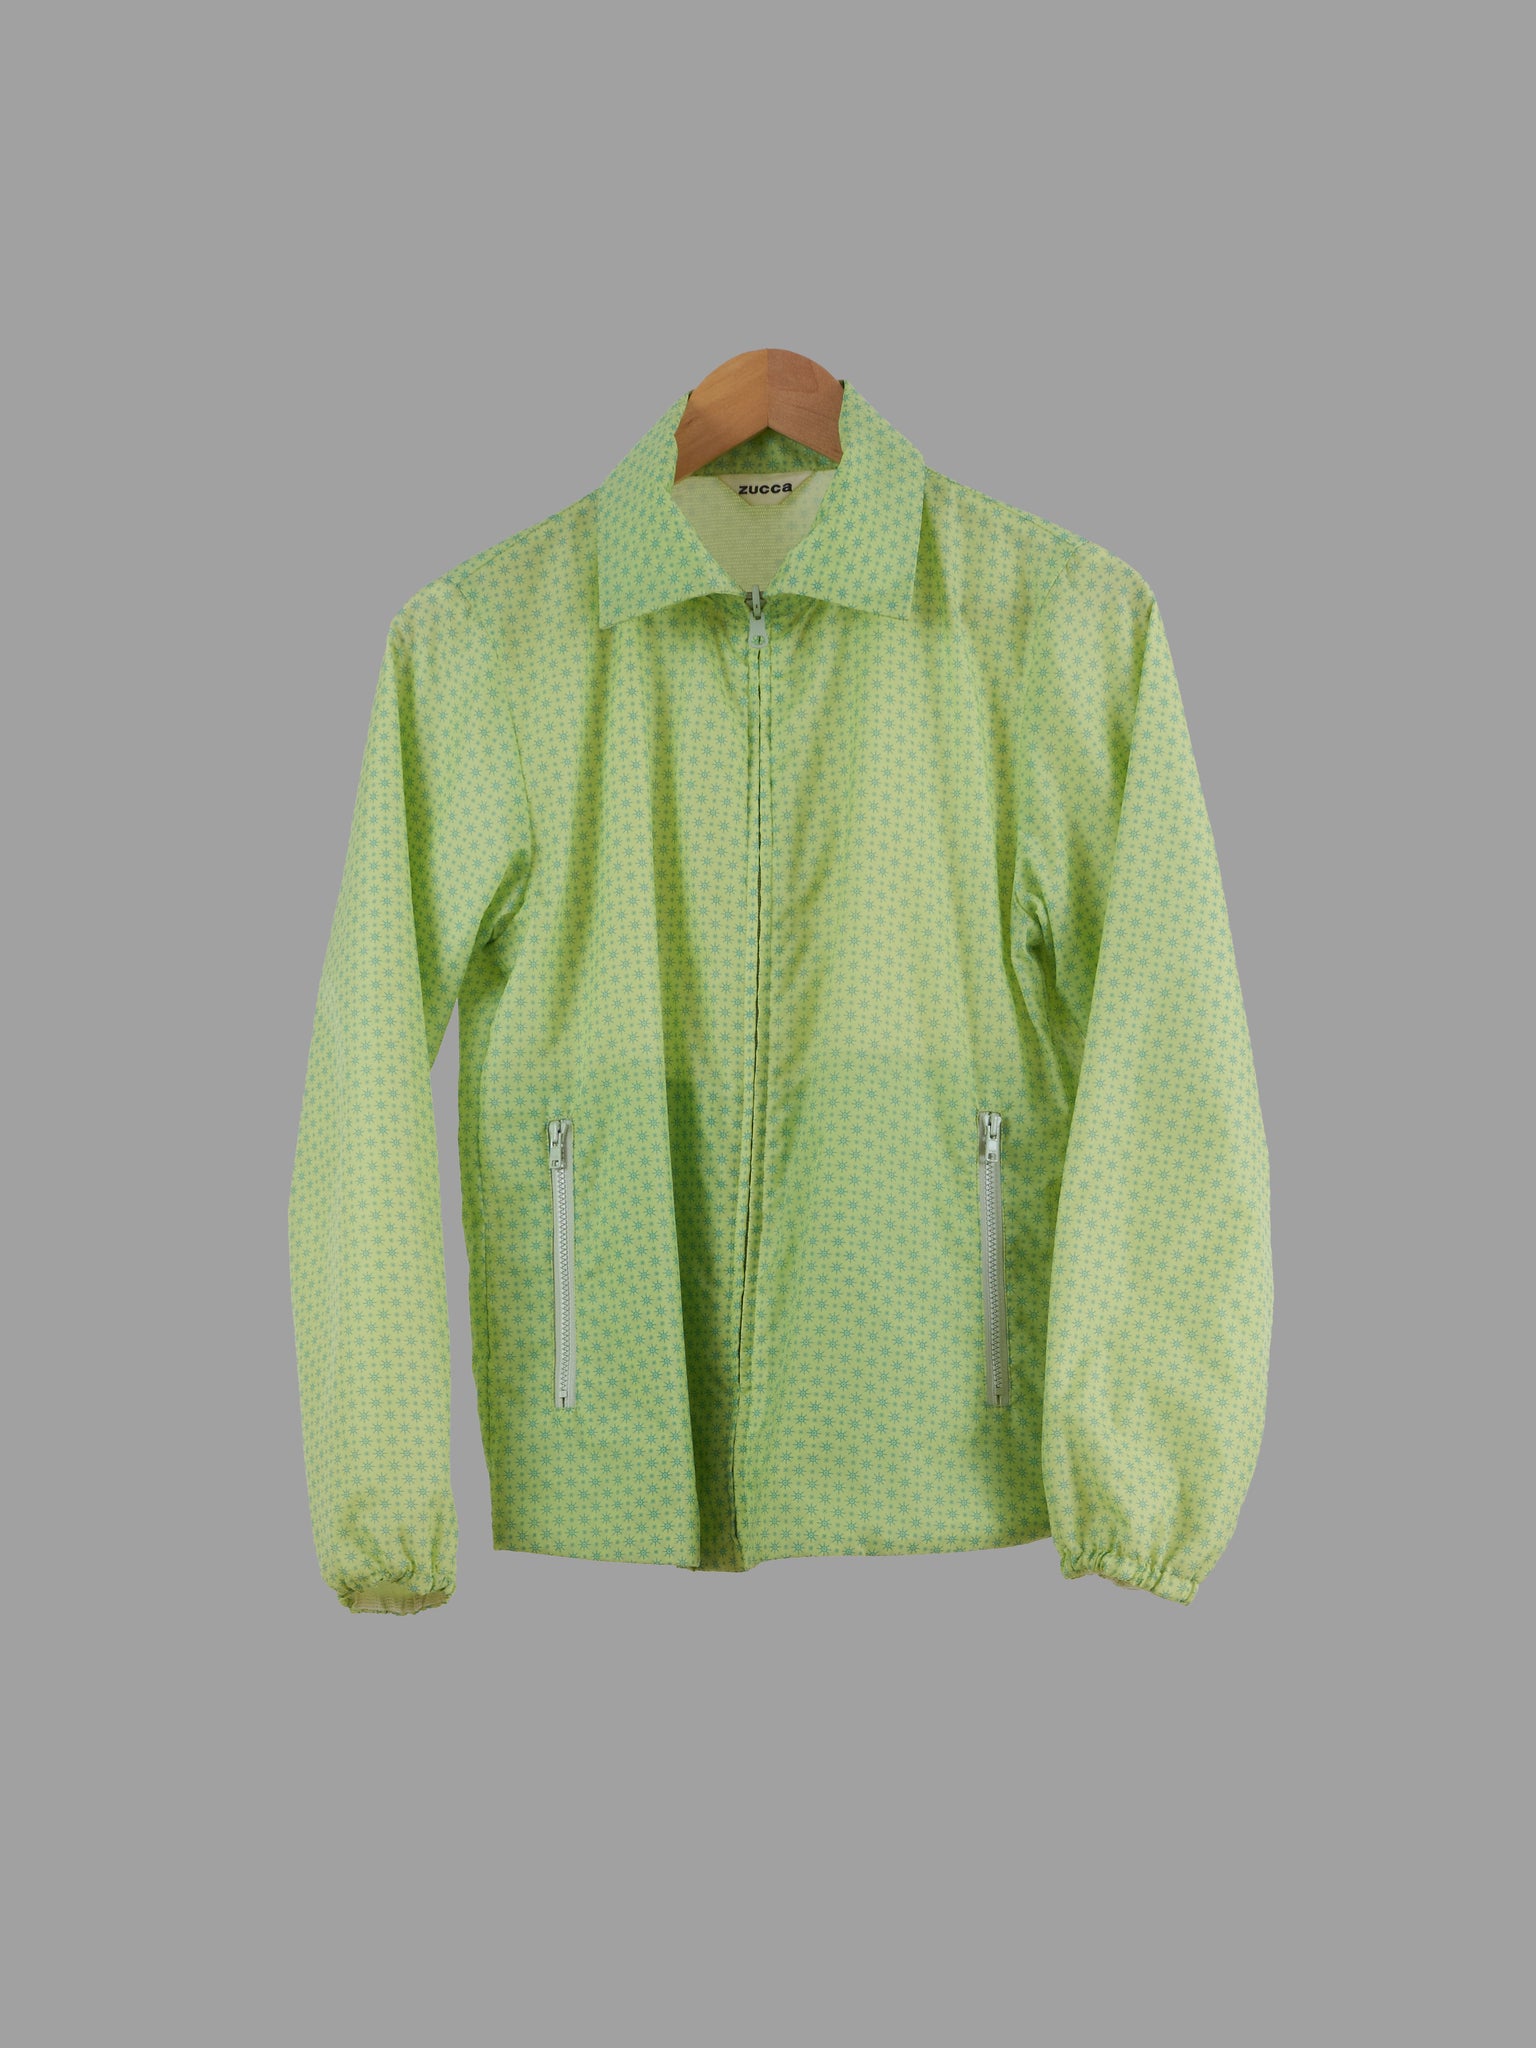 Zucca green patterned nylon reversible mesh lined zip jacket - womens size S